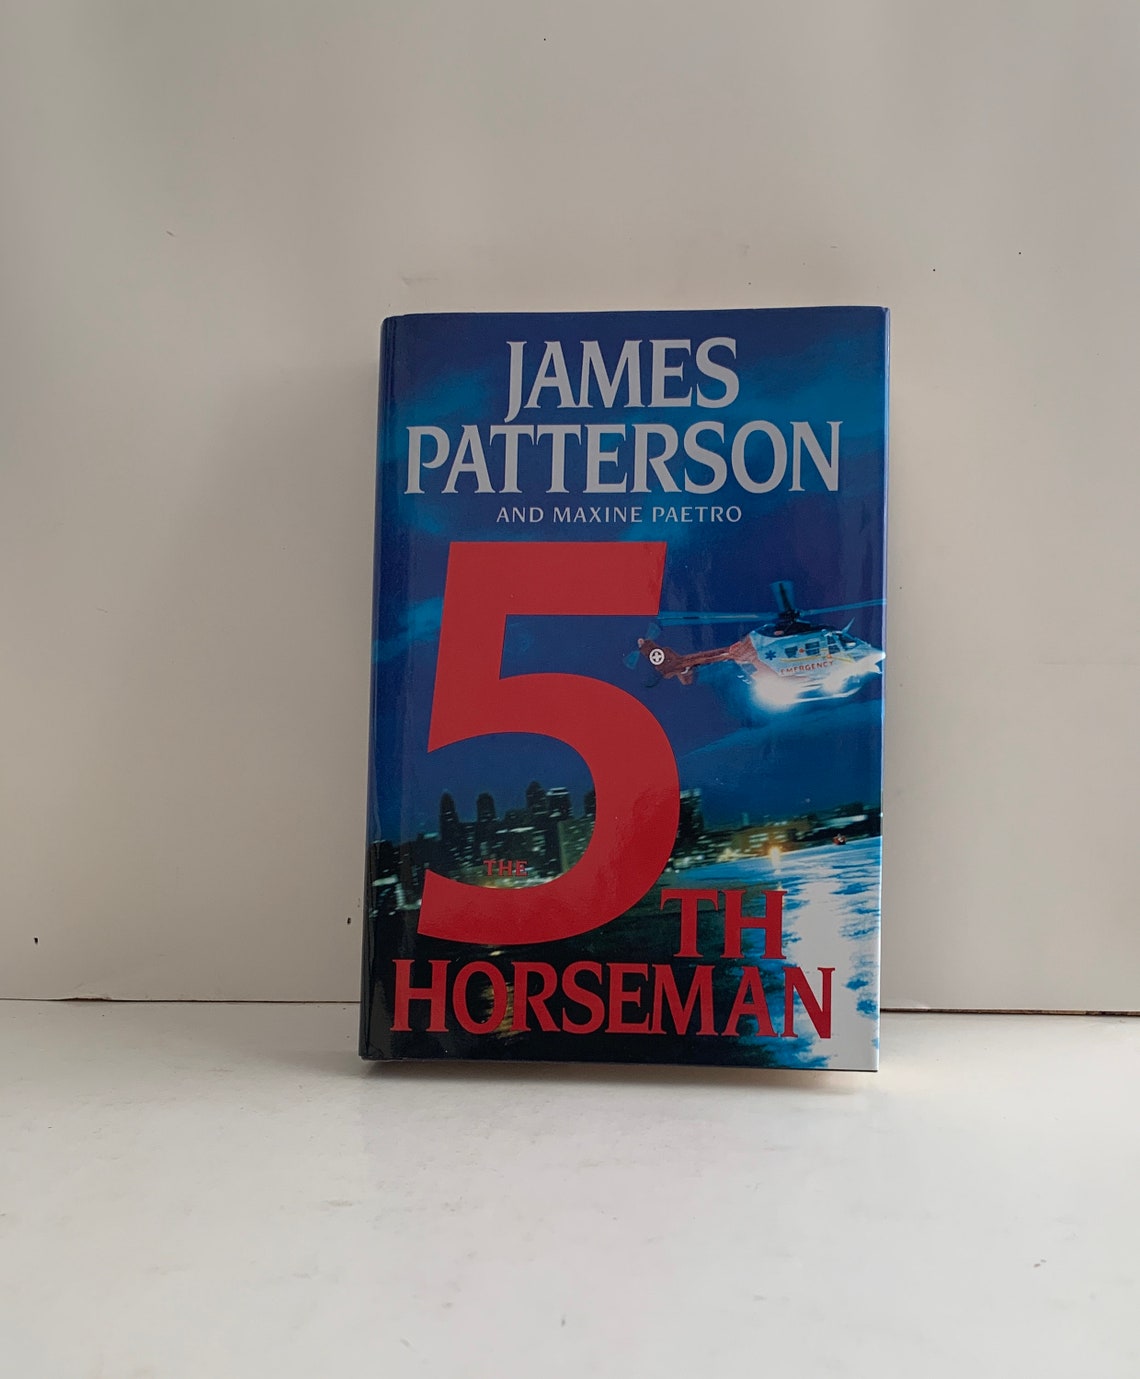 The 5th Horseman by James Patterson Hardcover - Etsy